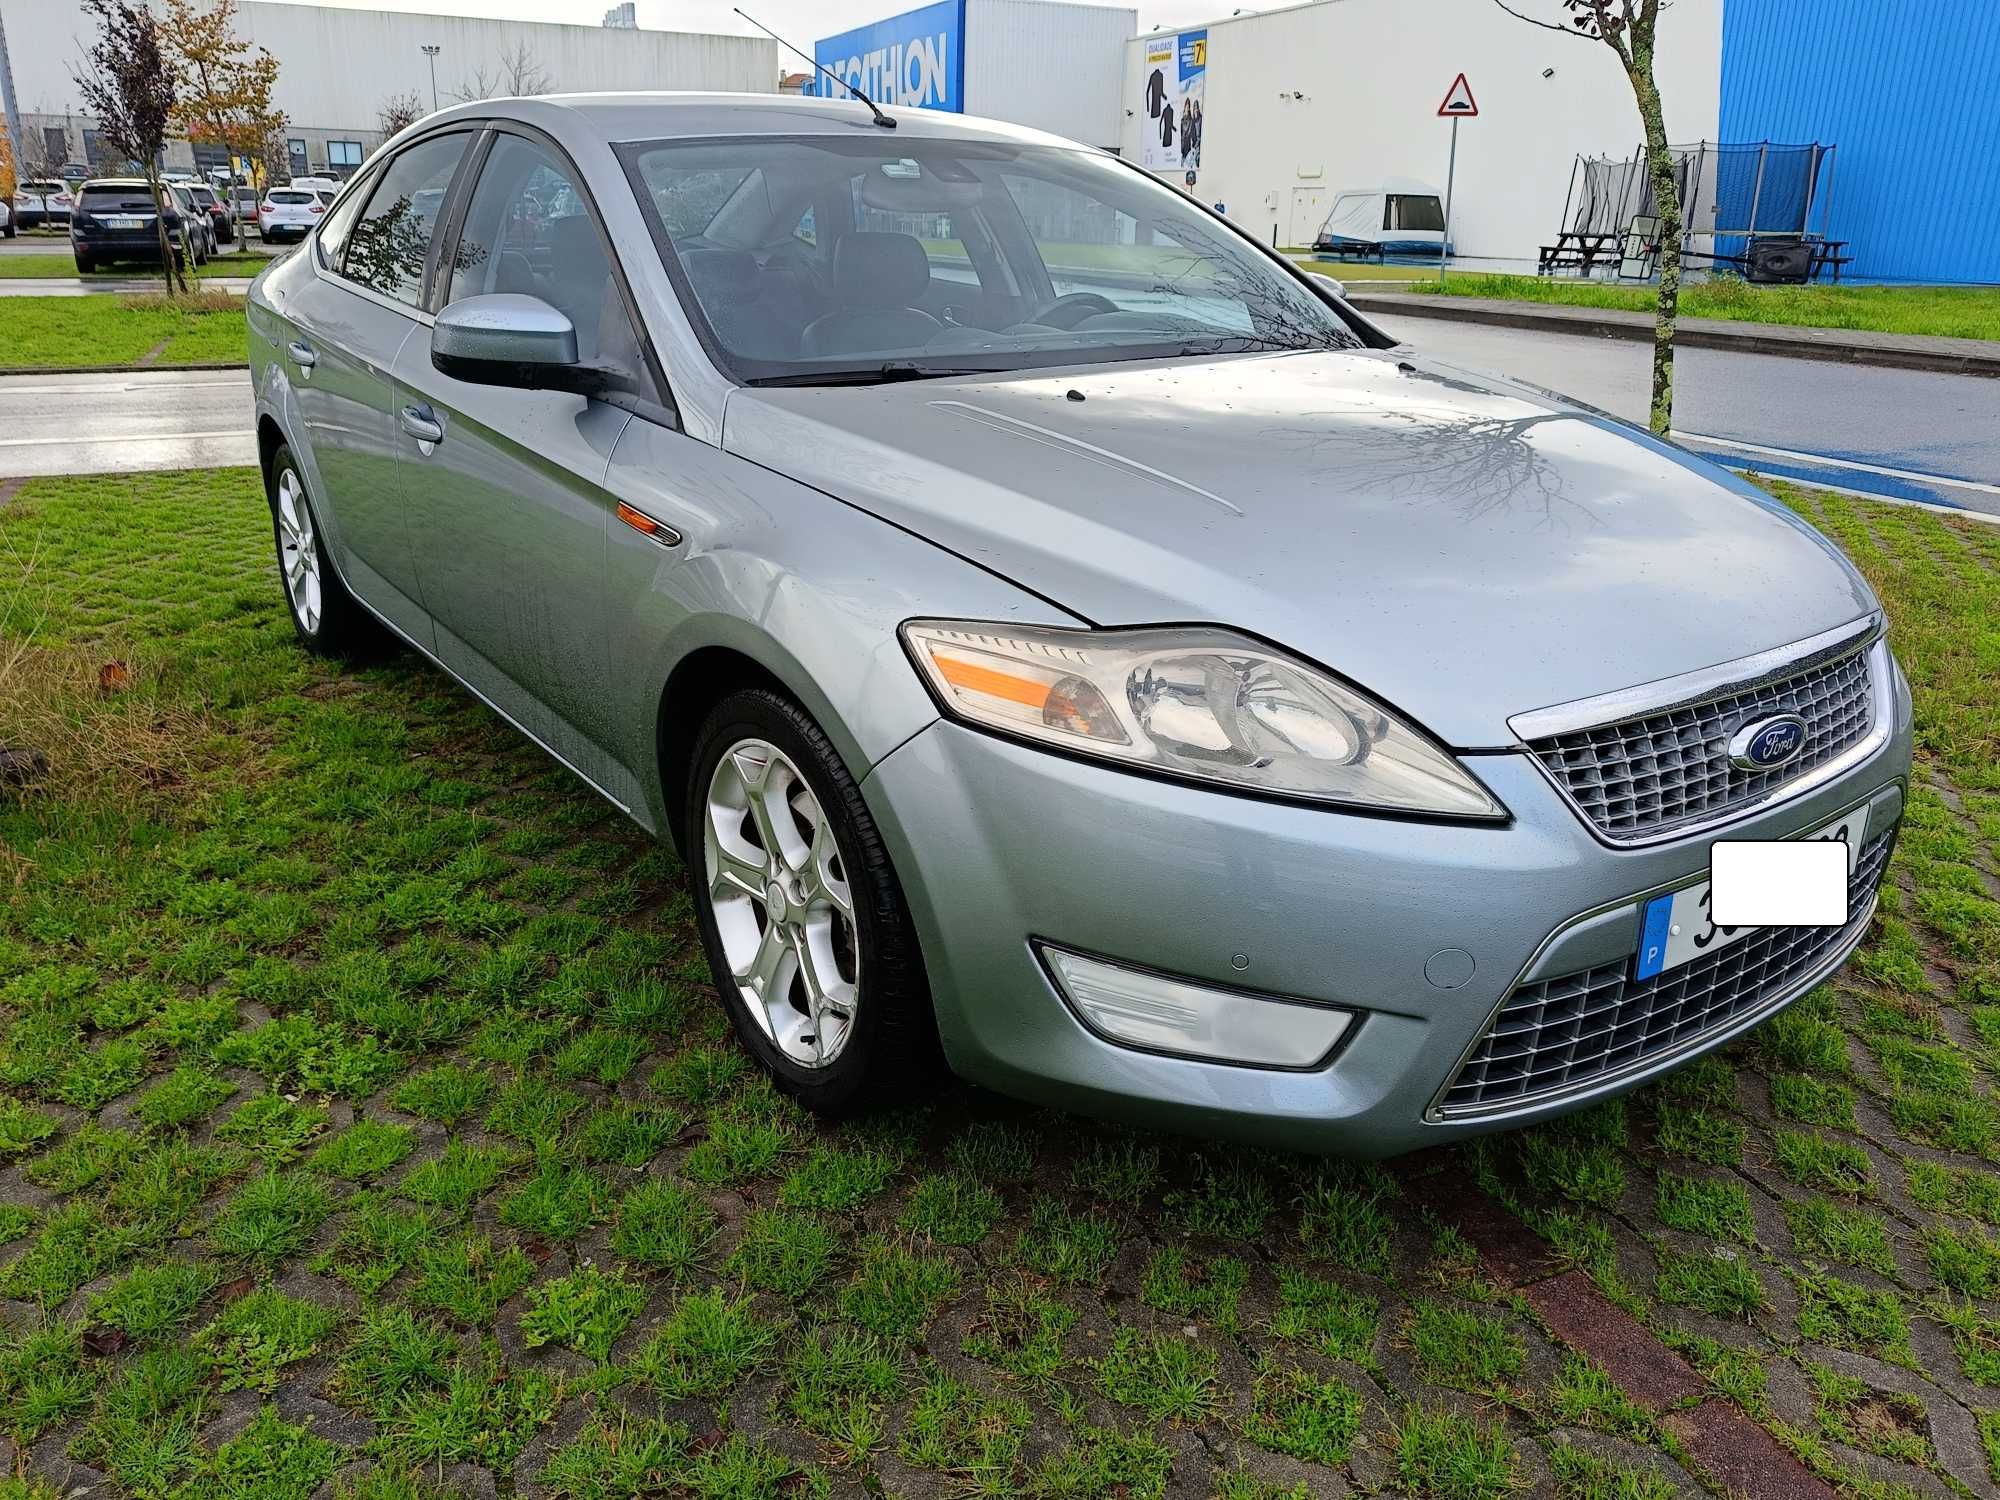 Ford Mondeo 1.8 TDCI - Impecvel